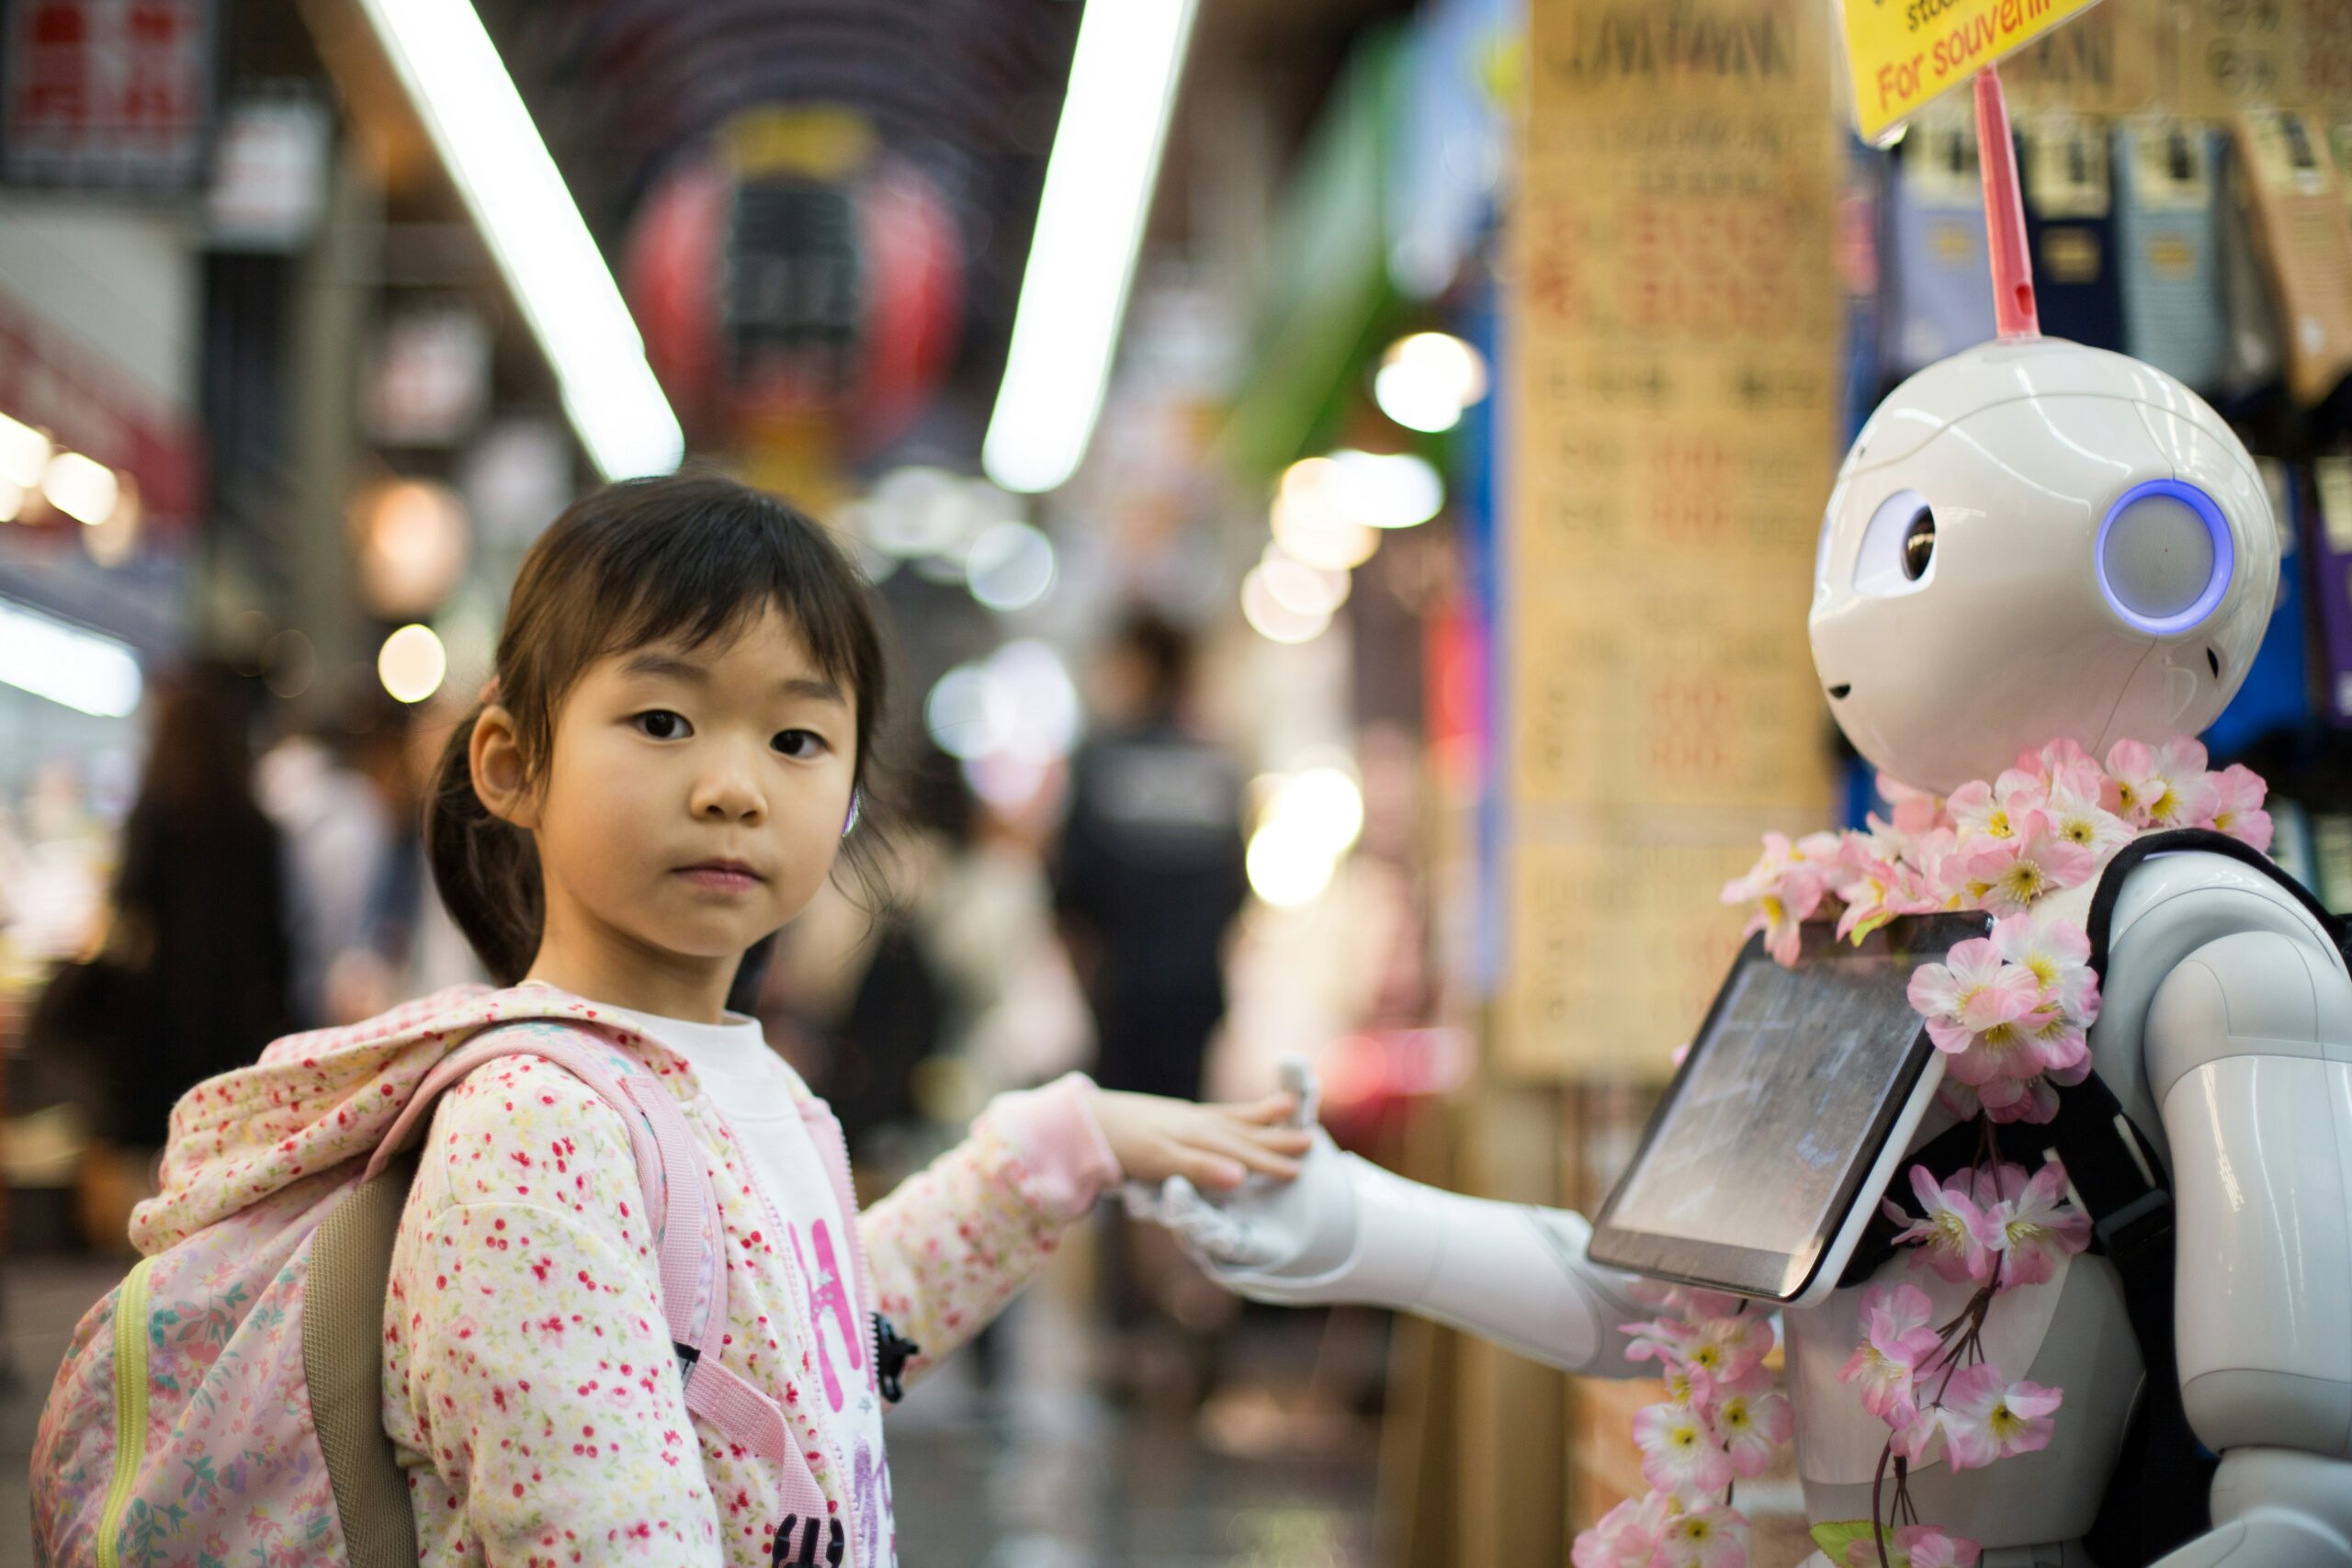 A young Asian girl with a pink patterned hoodie holds hands with a robot. It is white, made of smooth plastic with rounded features. It has a lei of pink flowers around its neck. Both look towards the camera.